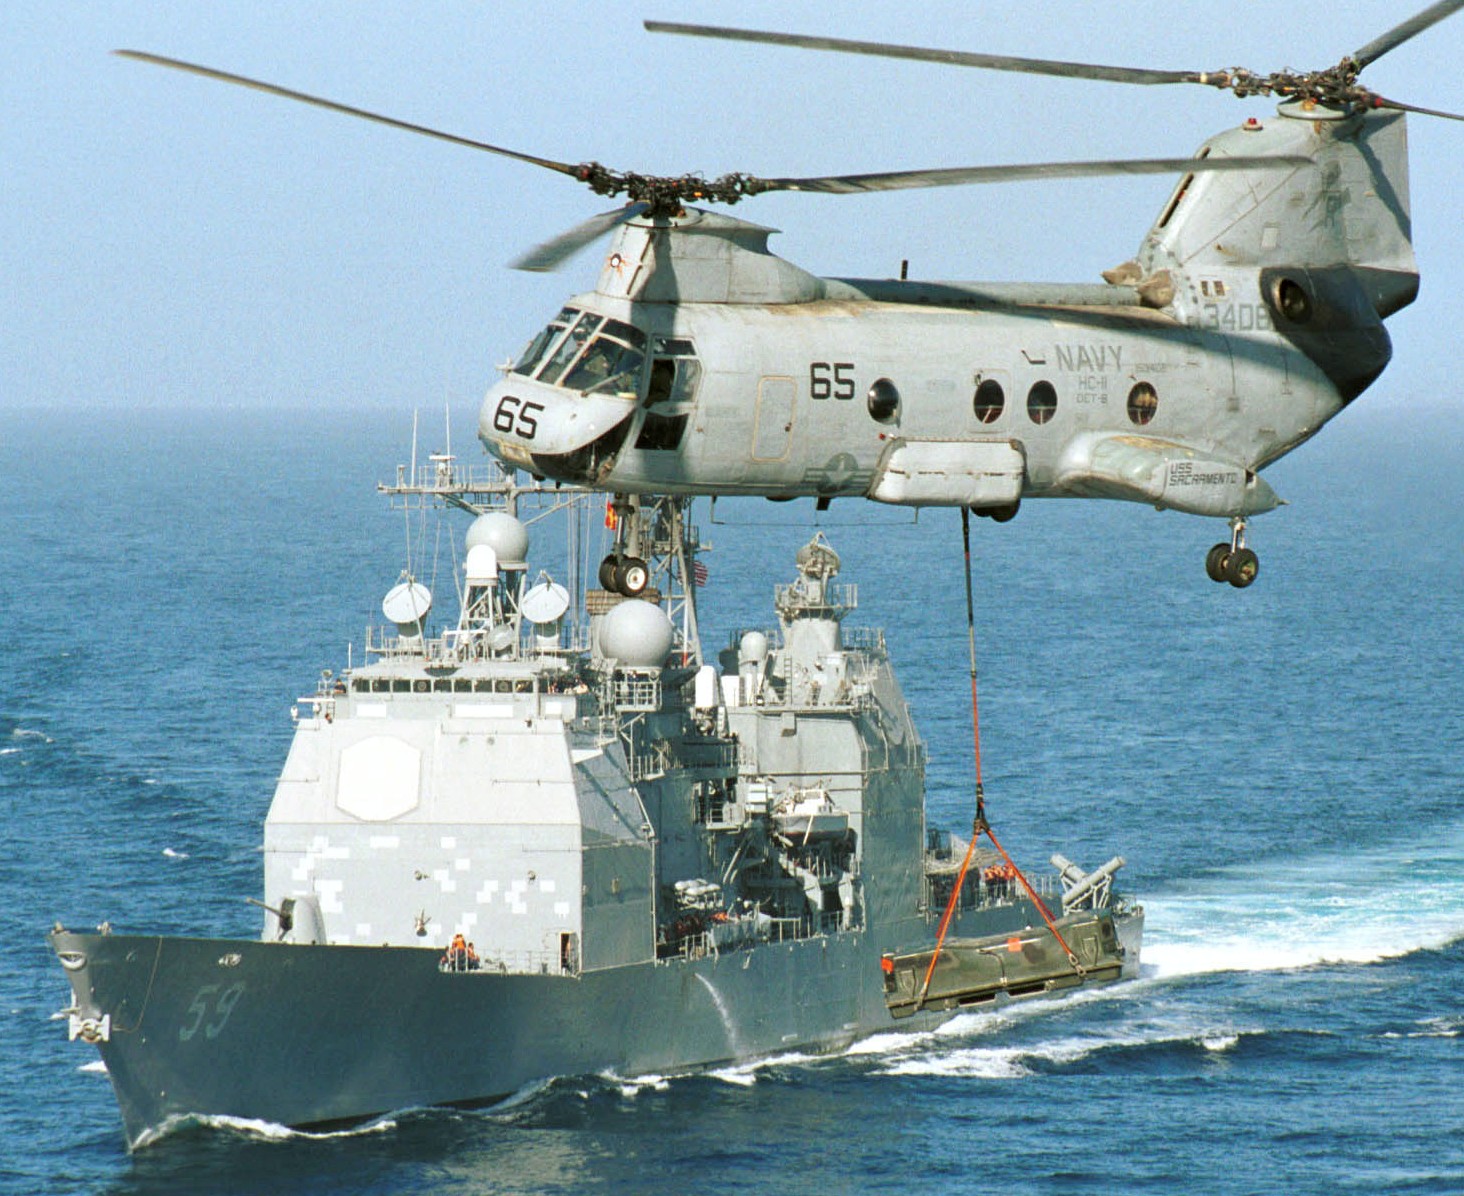 hc-11 gunbearers helicopter combat support squadron navy ch-46 sea knight 68